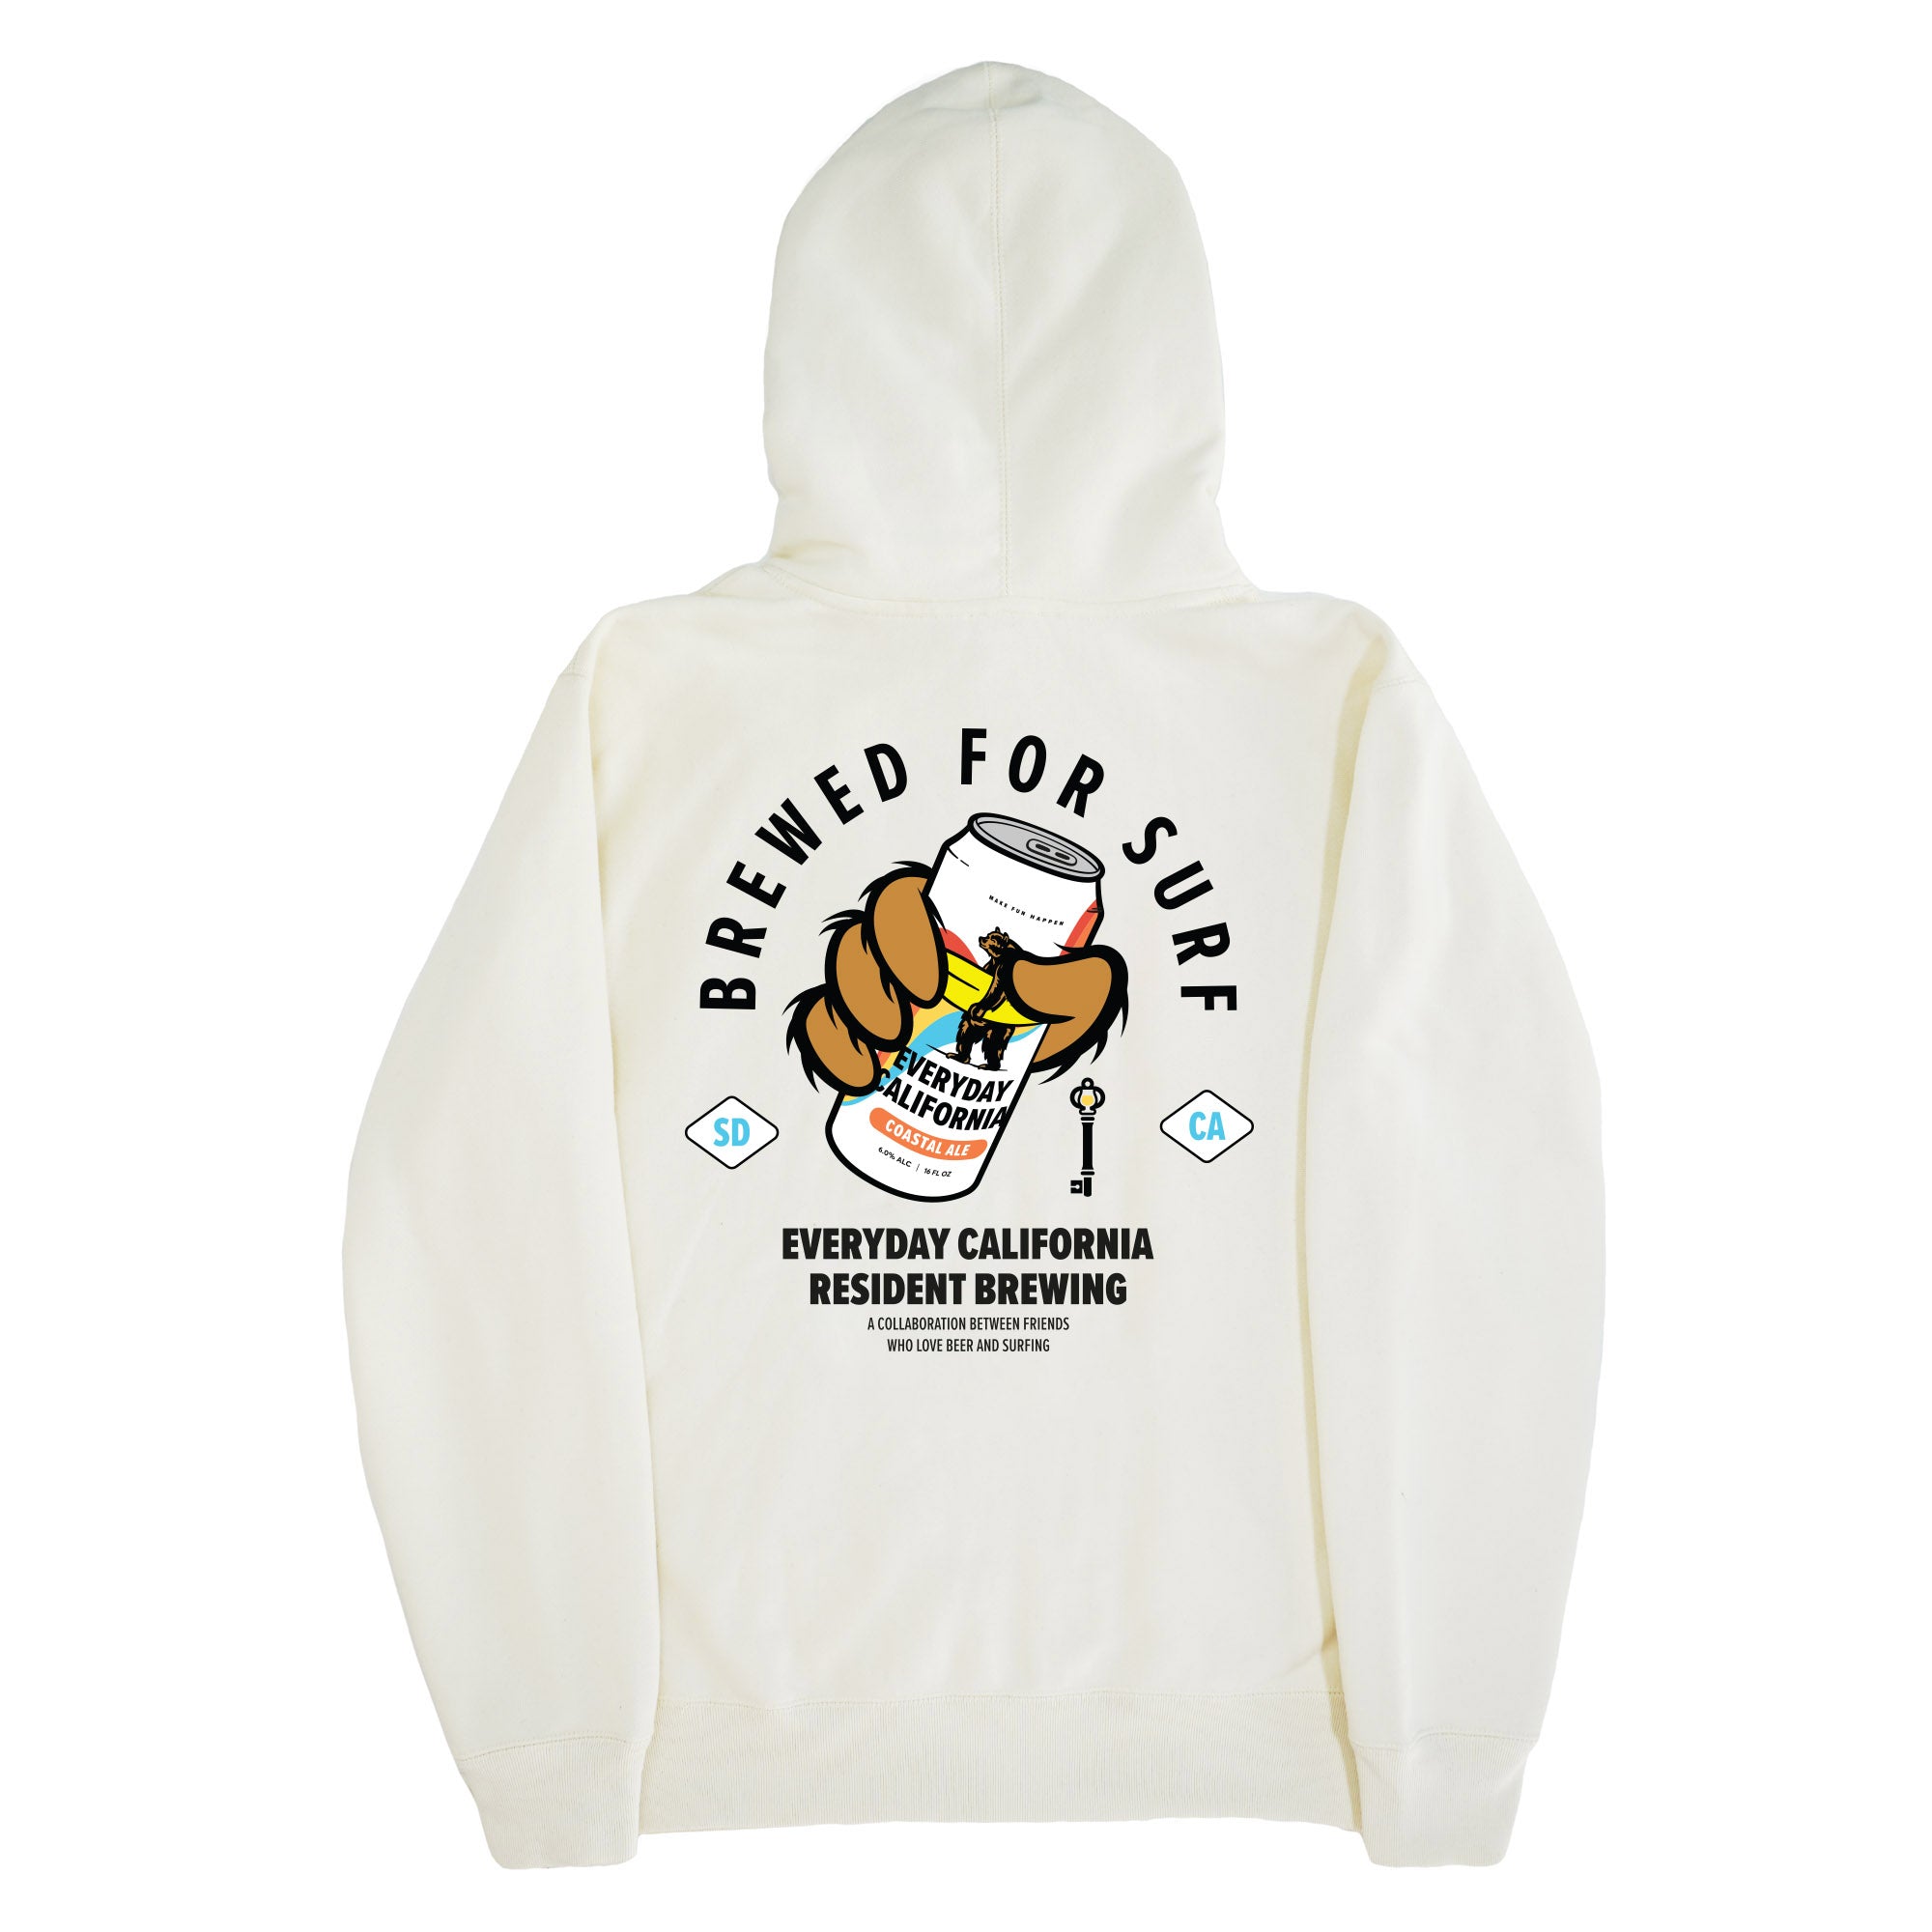 Everyday California Coastal Ale Hoodie in Bone - Collaboration with Resident Brewing for Everyday California Coastal Ale